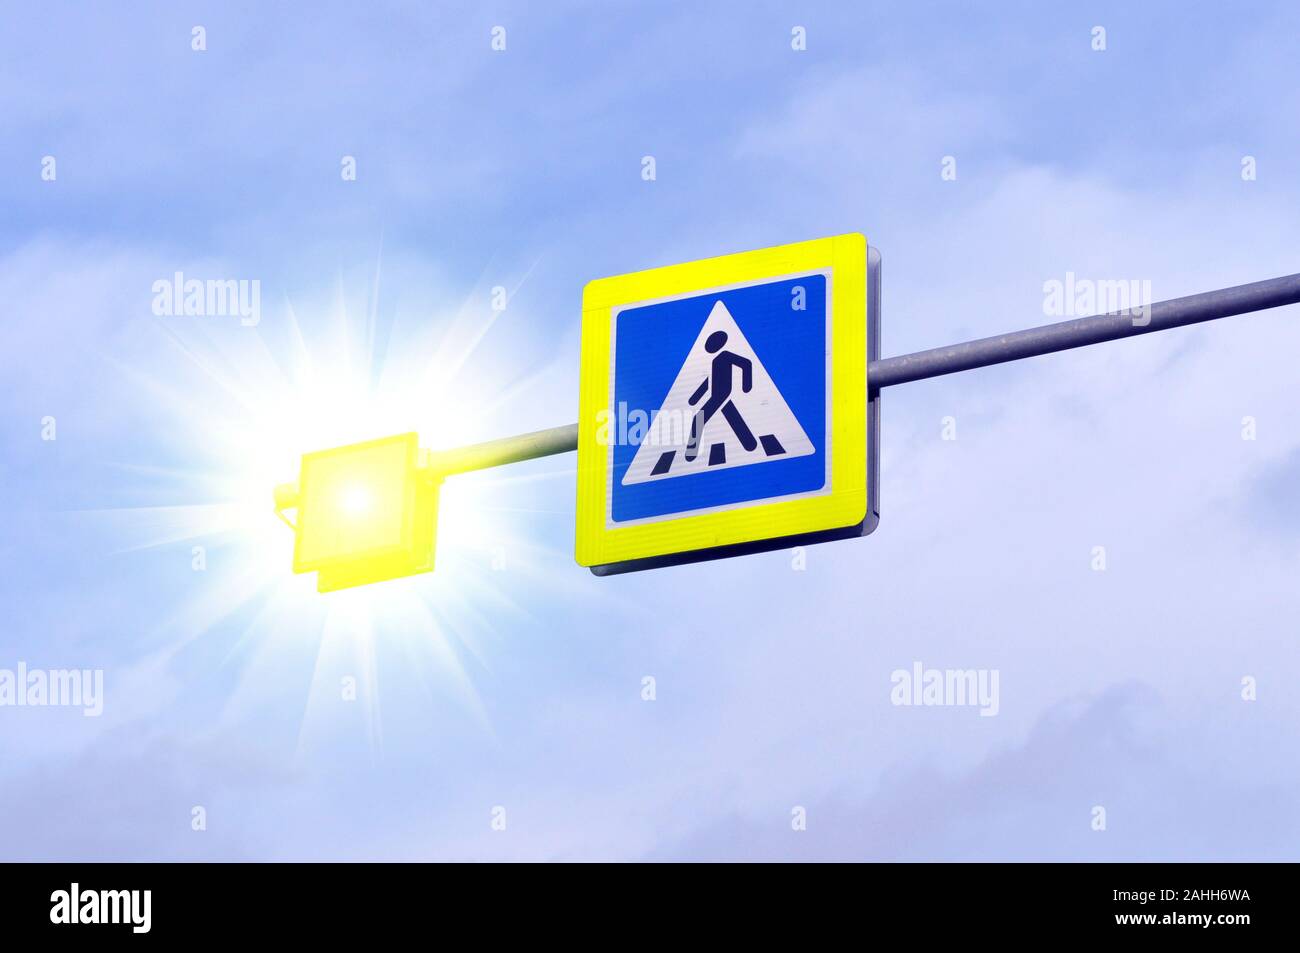 Pedestrian crossing road sign symbol. Bright blue and and luminous yellow pedestrian crosswalk sign Stock Photo